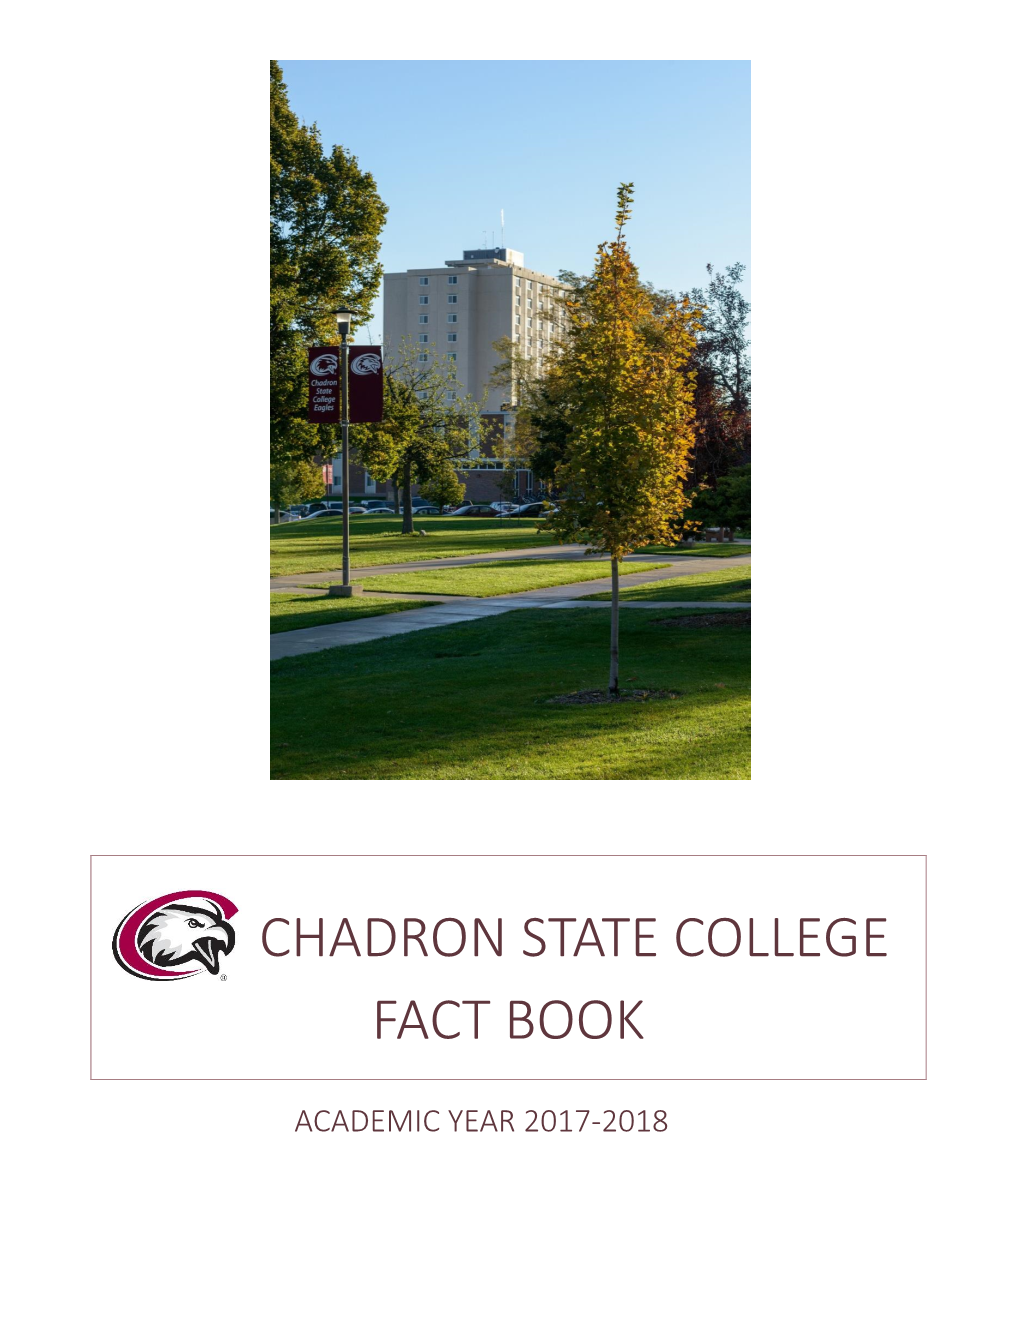 Chadron State College Fact Book Presents Data Relating to Enrollment, Graduates, Demographics, and Faculty and Staff for the Fall, Spring, and Summer Semesters